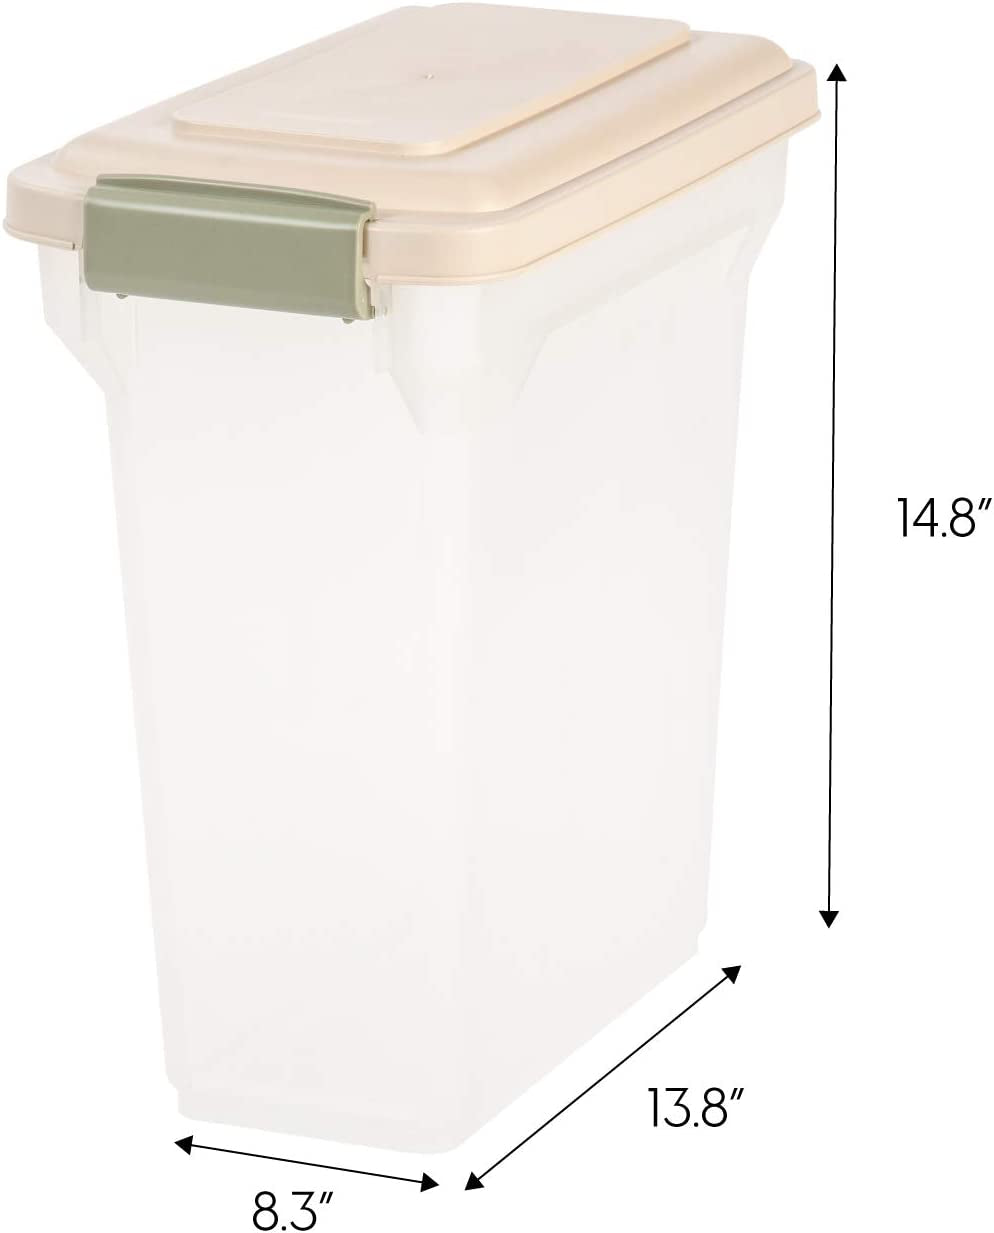 IRIS USA 12.5 Lbs / 15 Qt Weatherpro Airtight Pet Food Storage Container, for Dog Cat Bird and Other Pet Food Storage Bin, Pet Supplies, Keep Pests Out, Keep Fresh, Easy Access, BPA Free, Almond/Clear